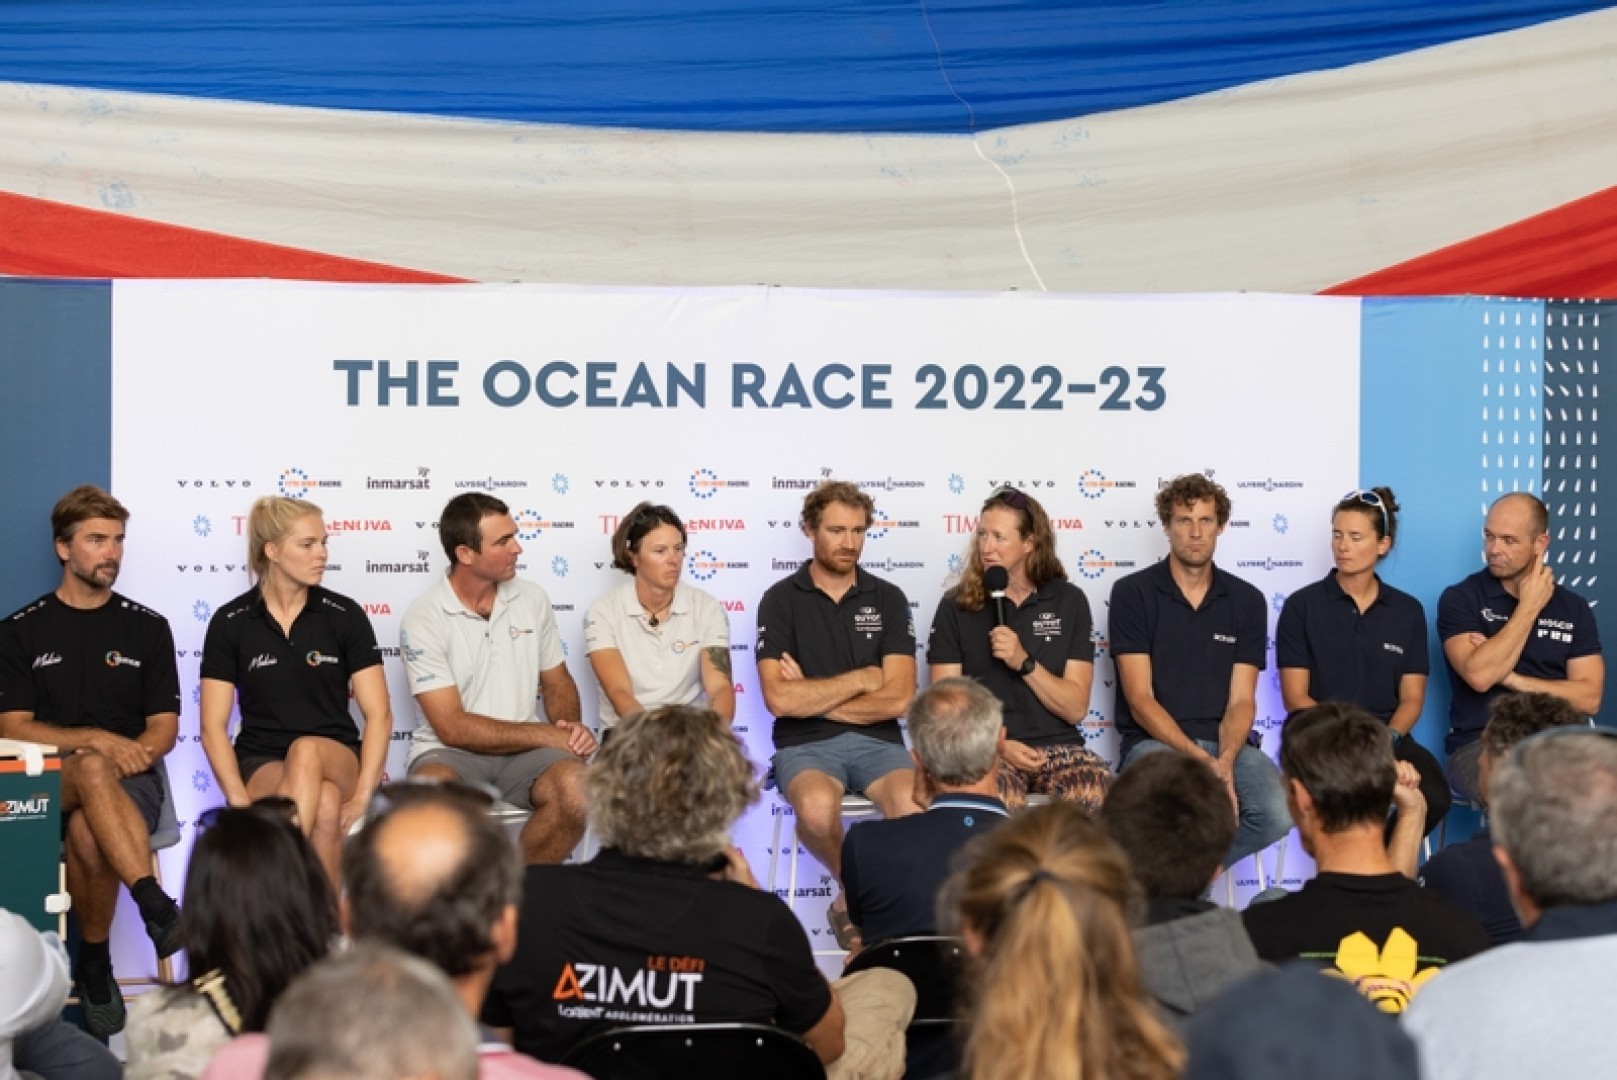 13 Sept 2022, Media presentation with The Ocean Race IMOCA skippers at Team Malizia base in Lorient.